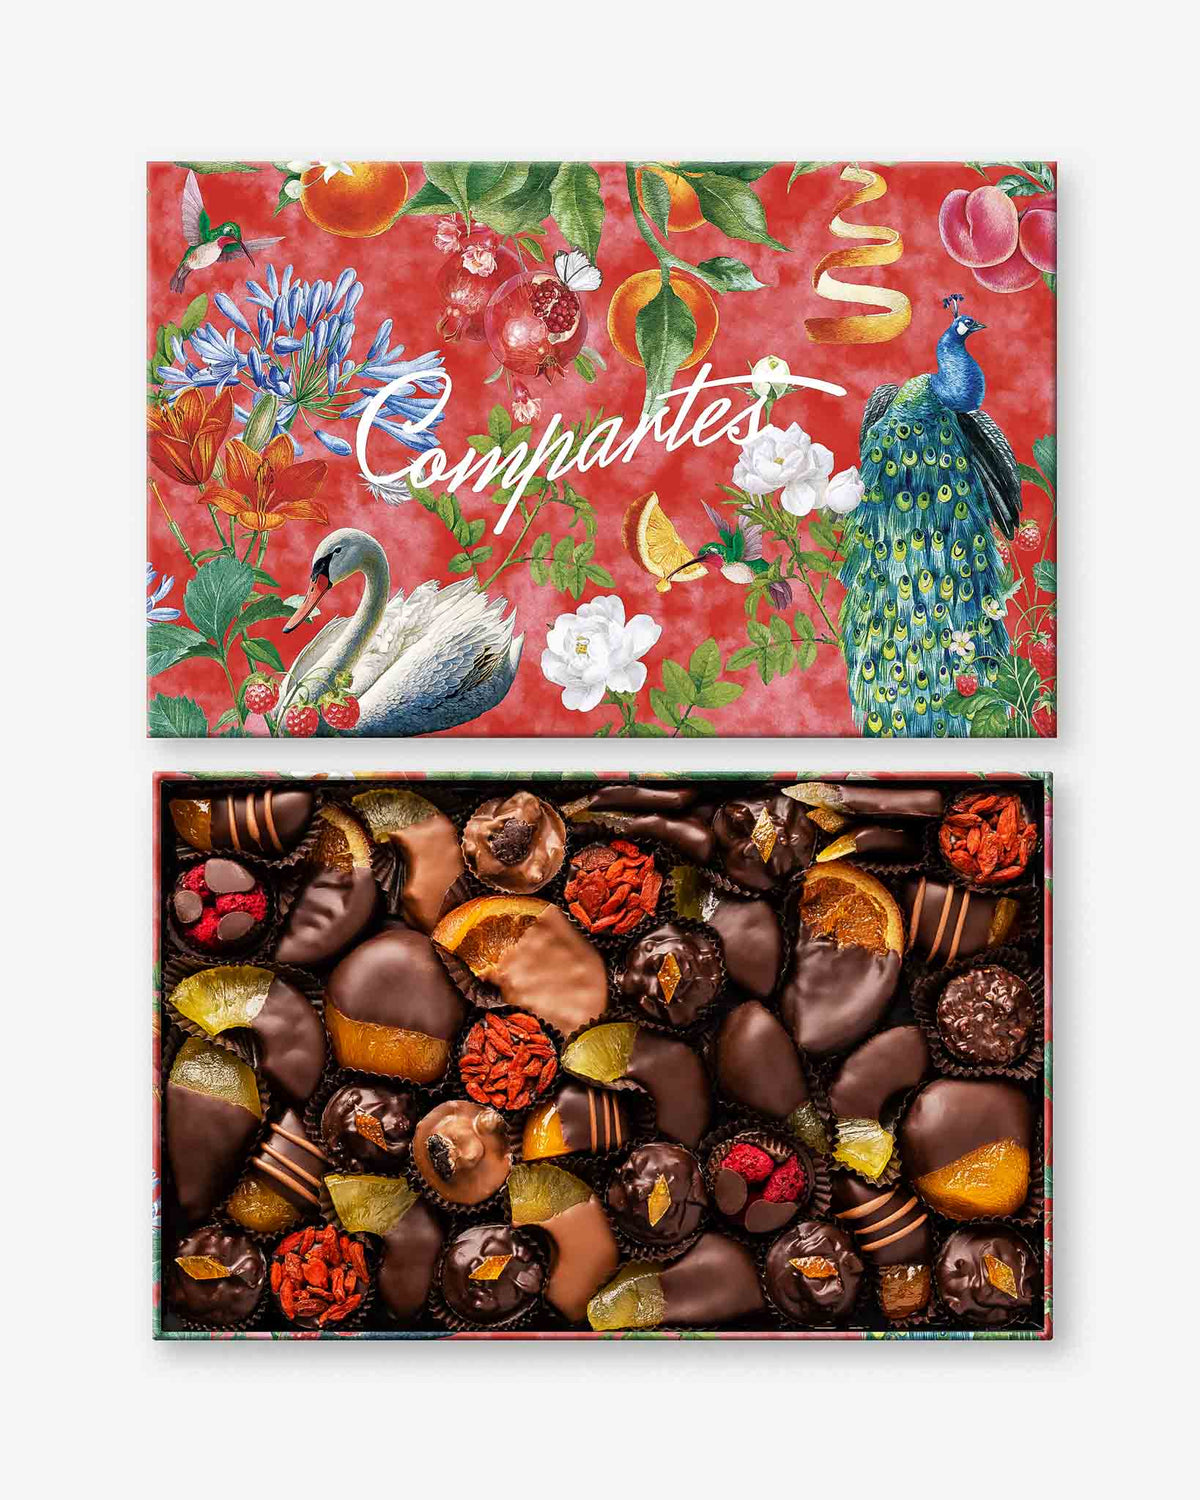 Luxury Chocolate Gift Box - Premium Chocolate Dipped Fruits - Gourmet Chocolates and Chocolate Gifts by Compartes